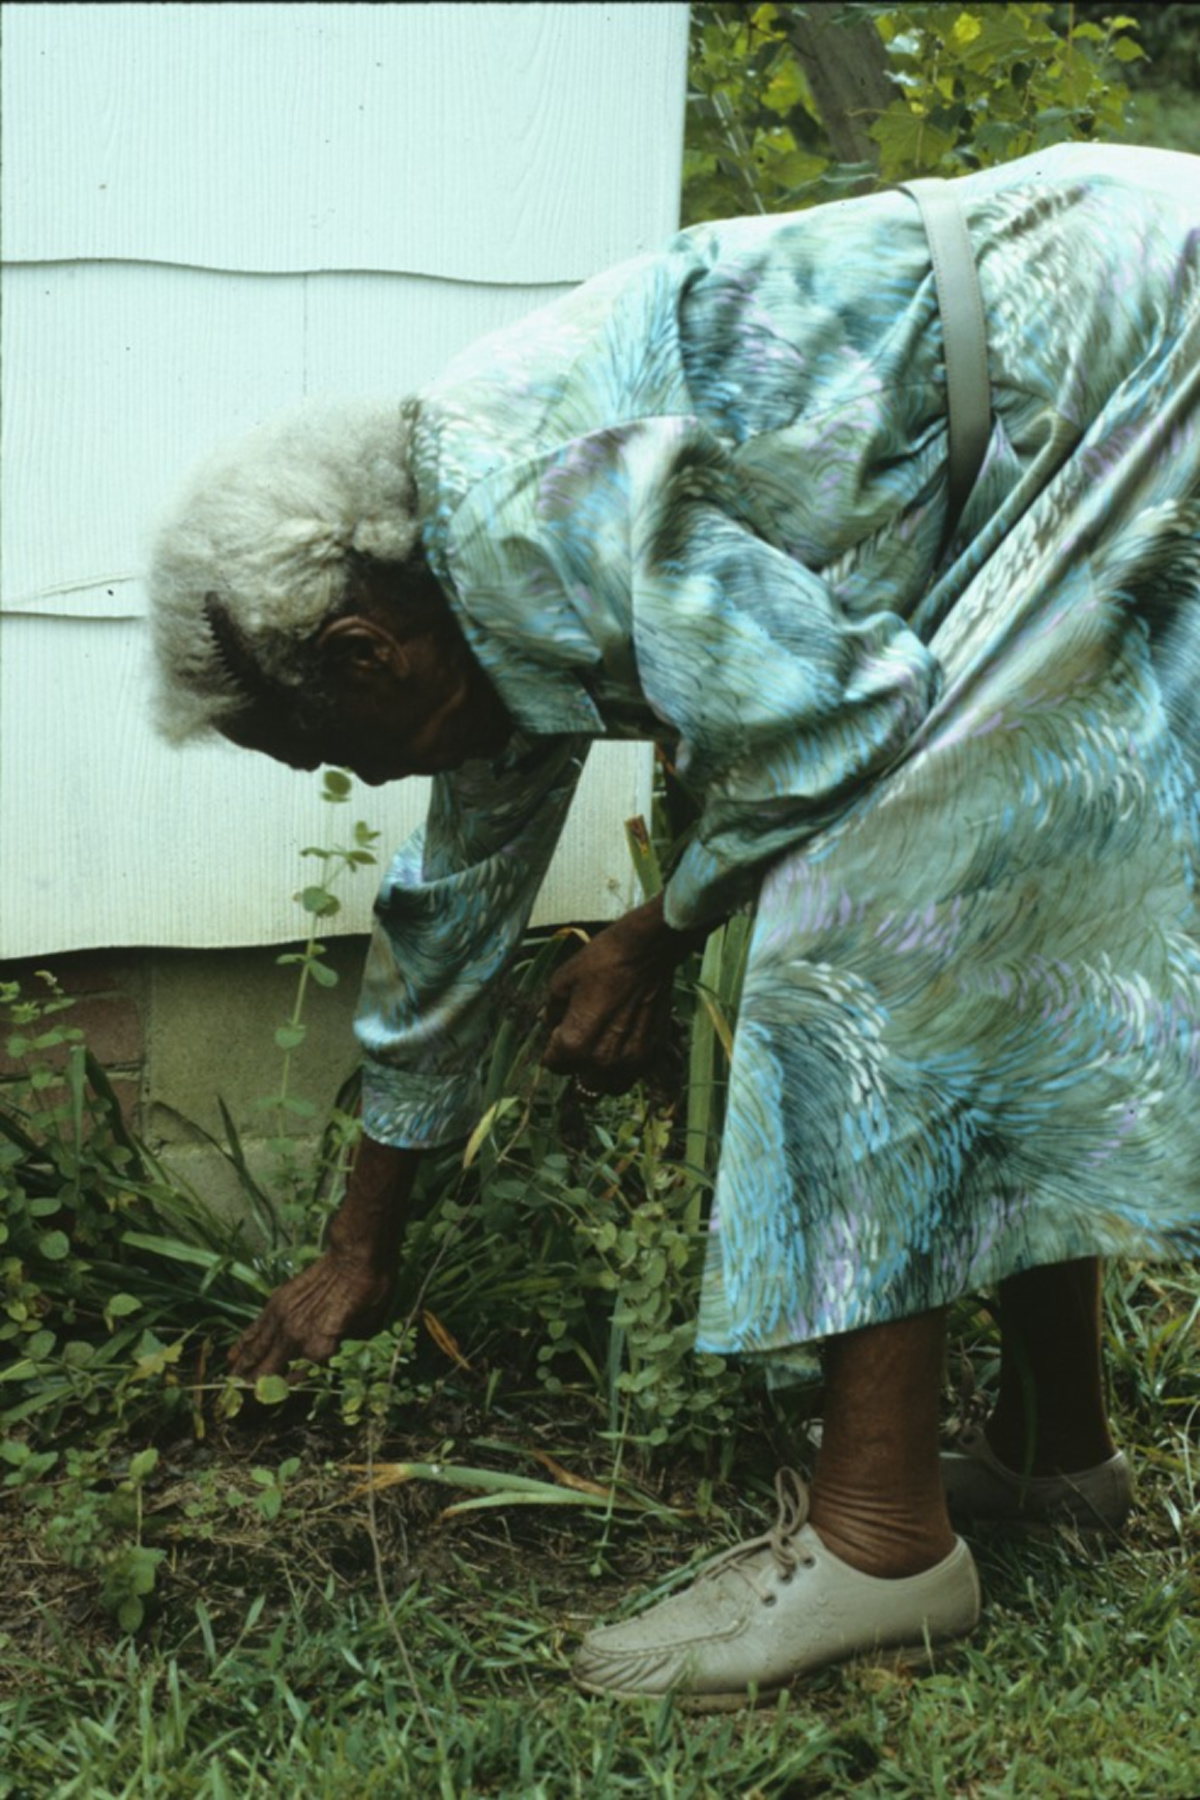 Emma Dupree bending over to gather herbs